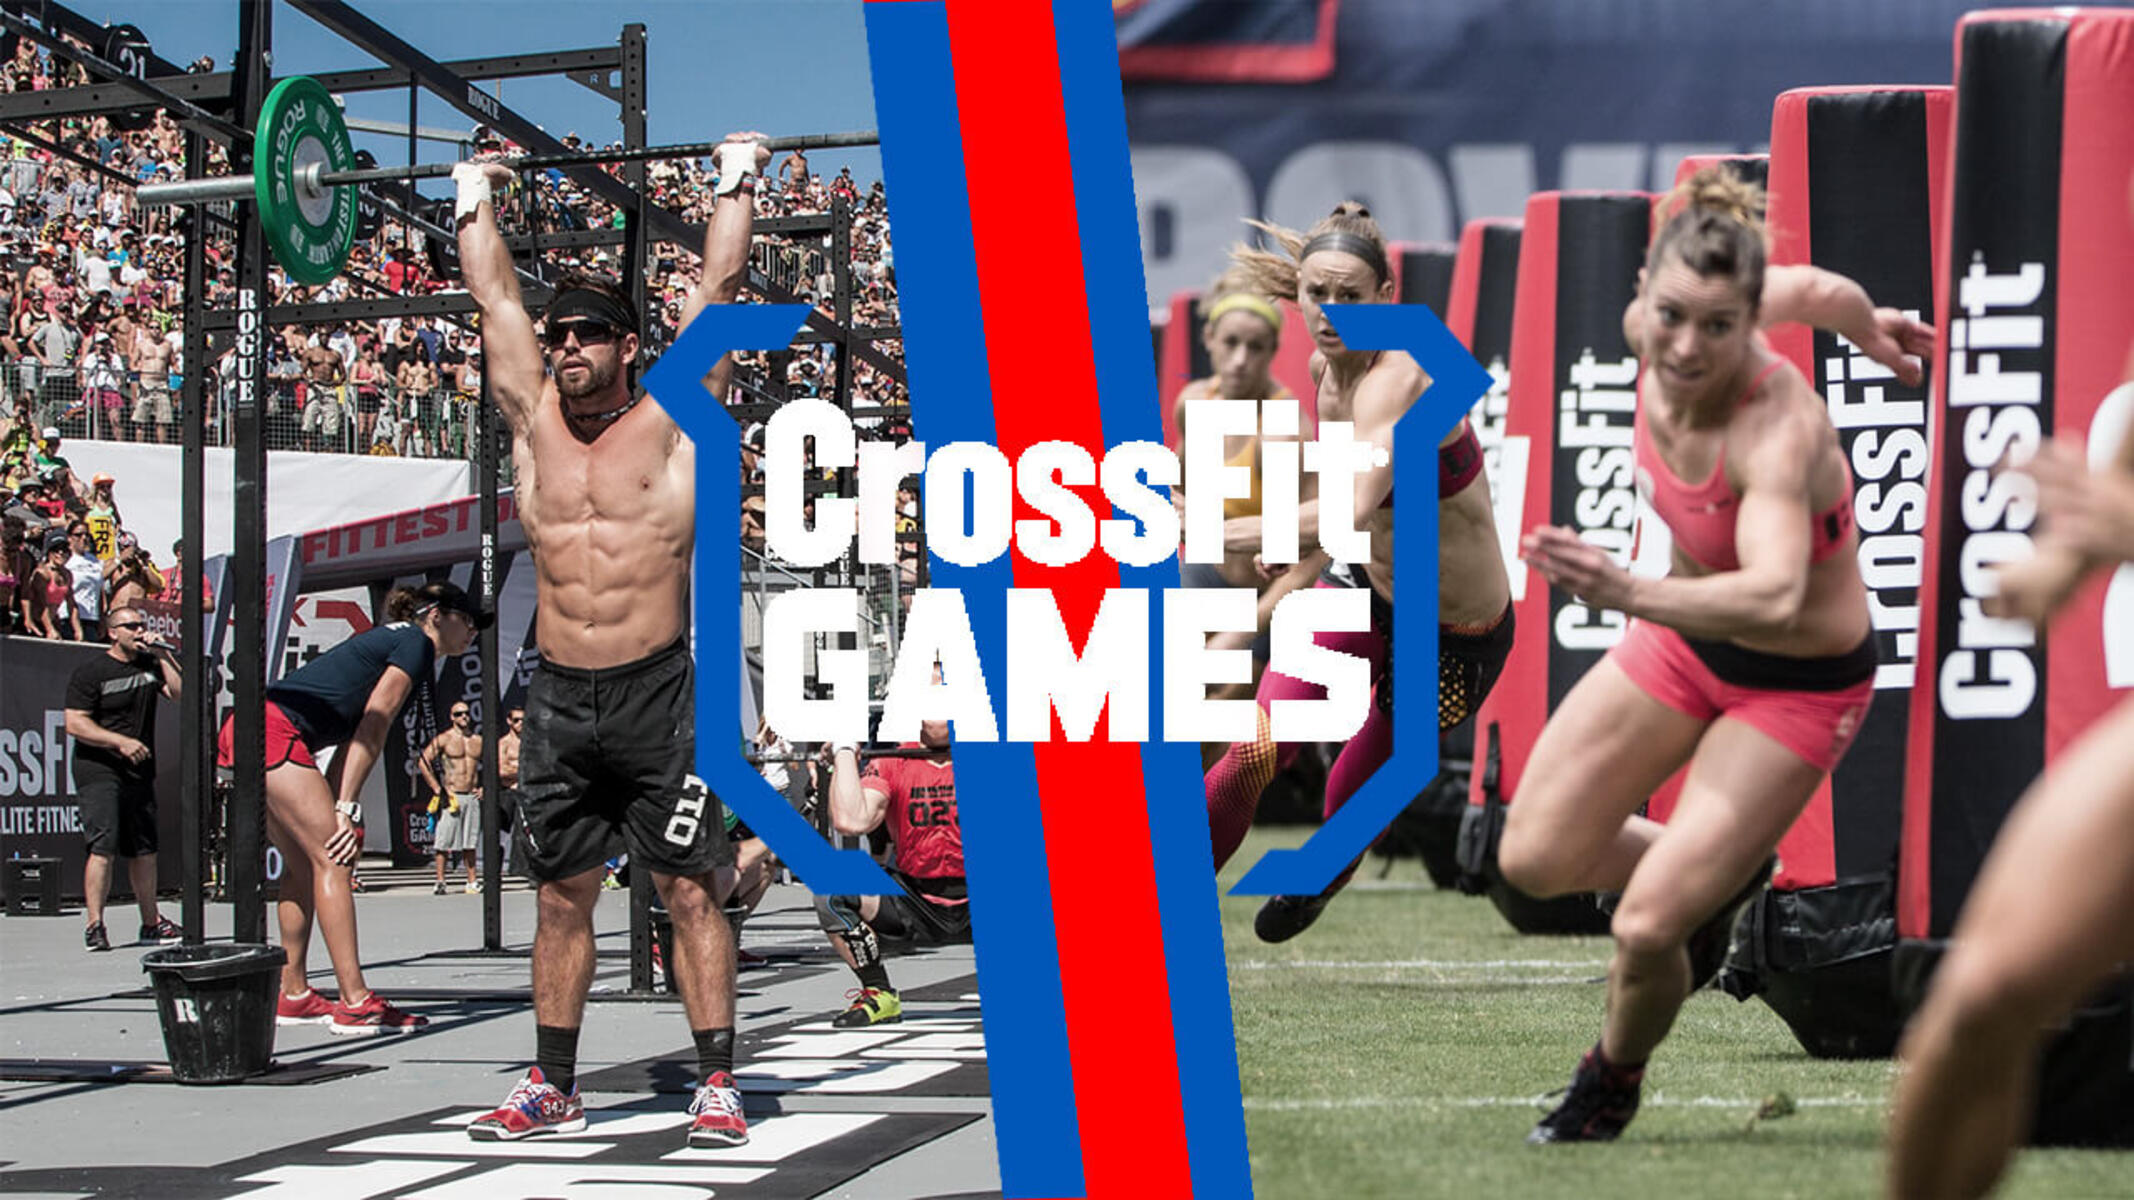 How To Watch Crossfit Games 2022